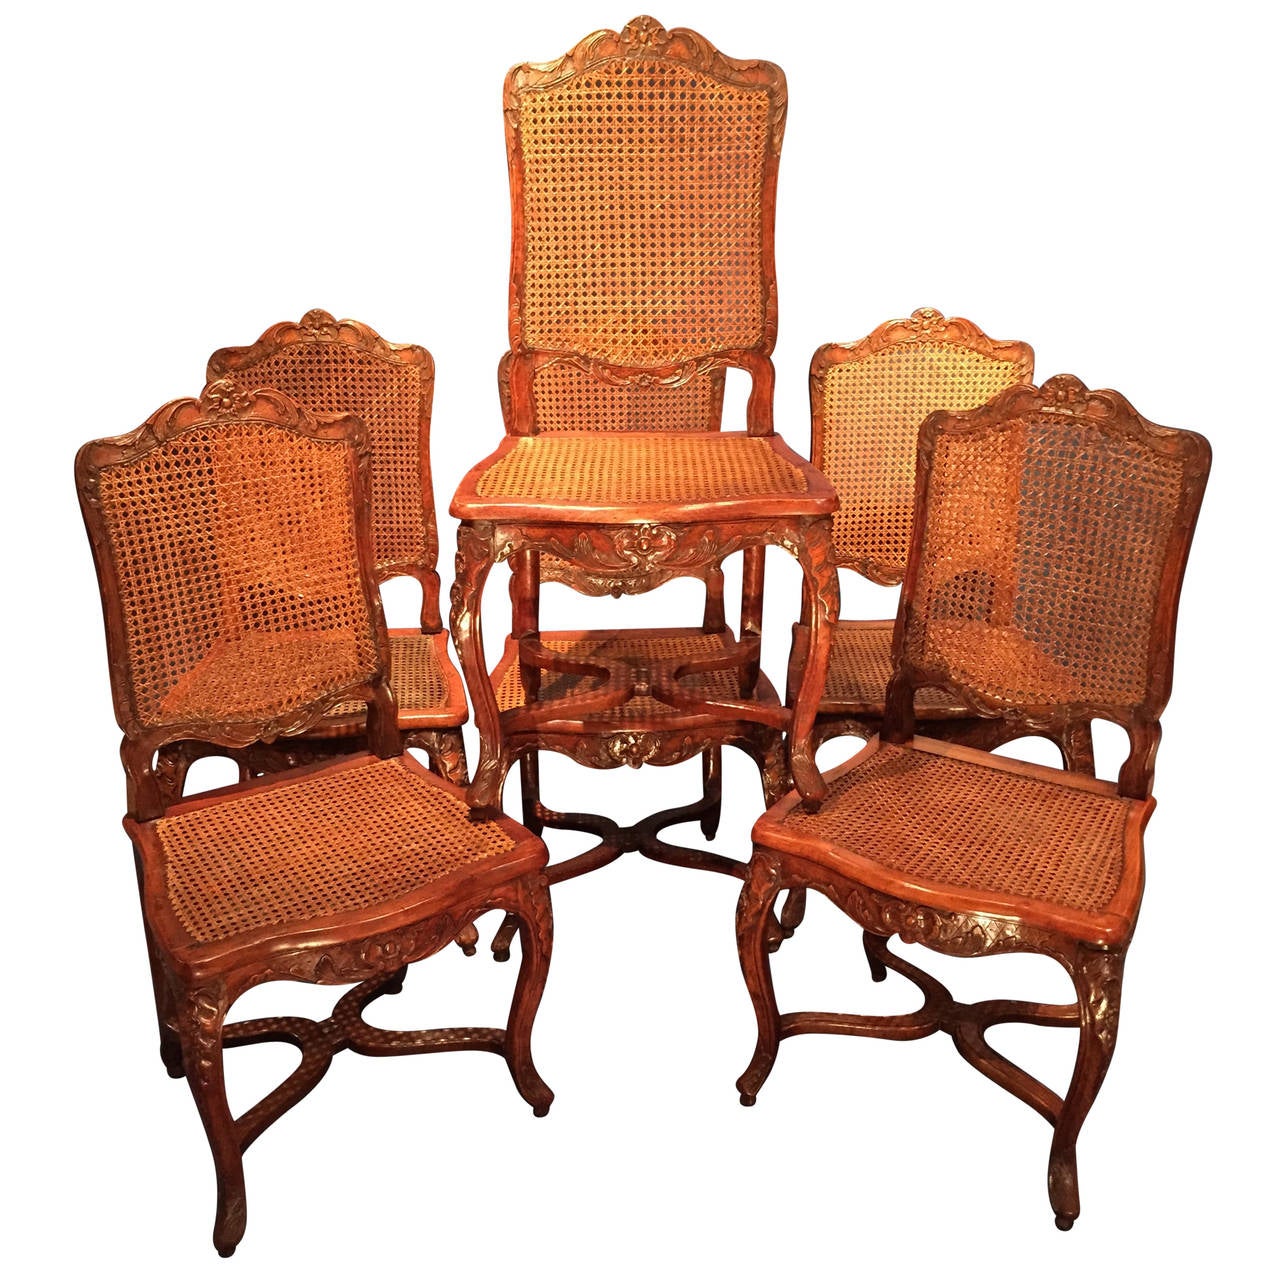 French Suite of Six Chairs, Paris Régence Period, circa 1720 For Sale